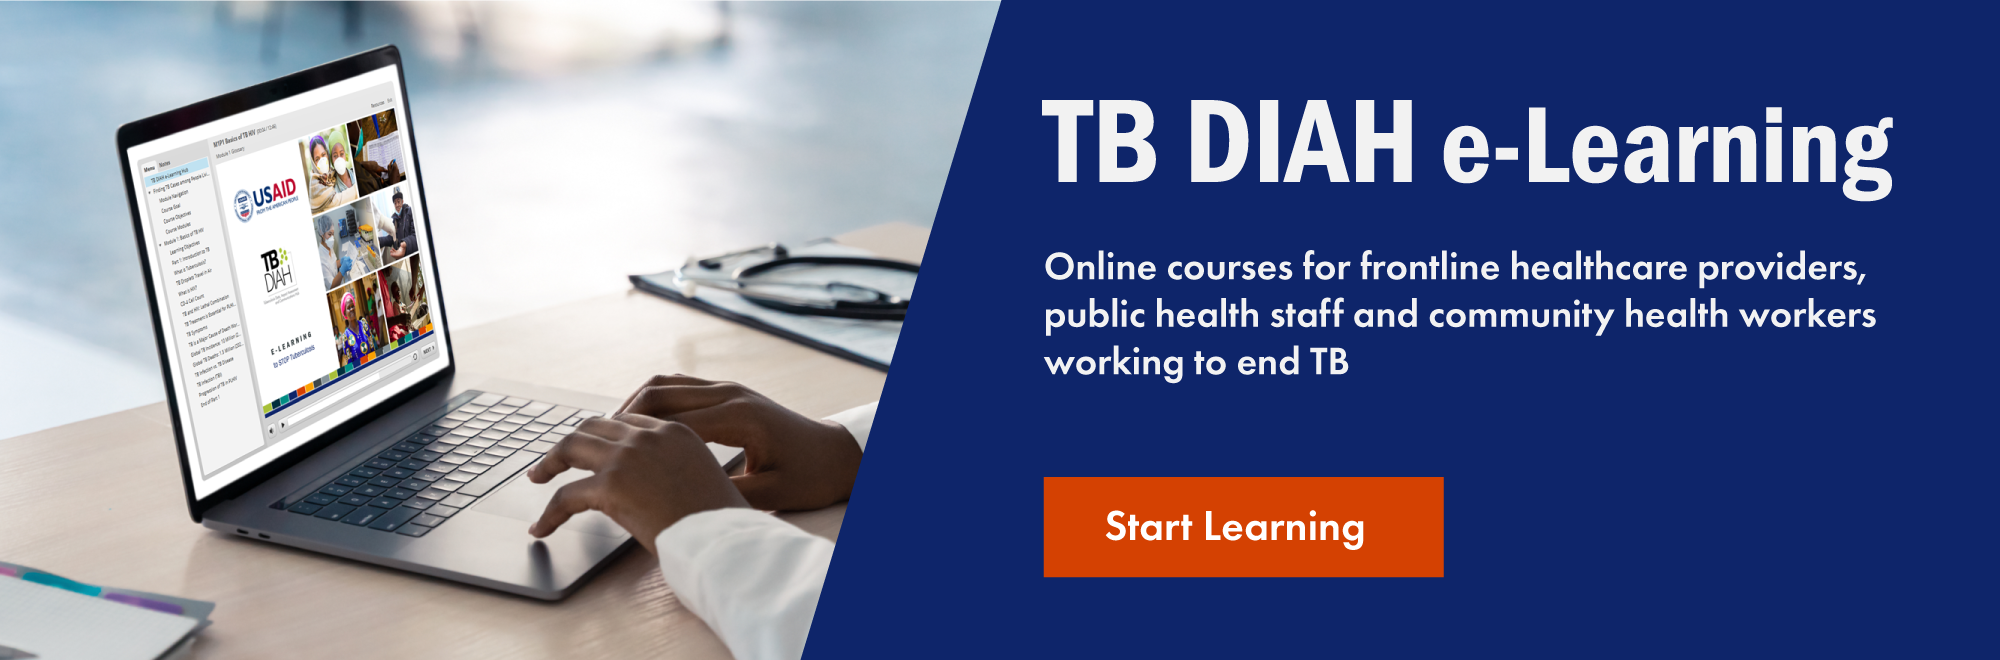 TB DIAH e-Learning Online courses for frontline healthcare providers, public health staff and community health workers worki